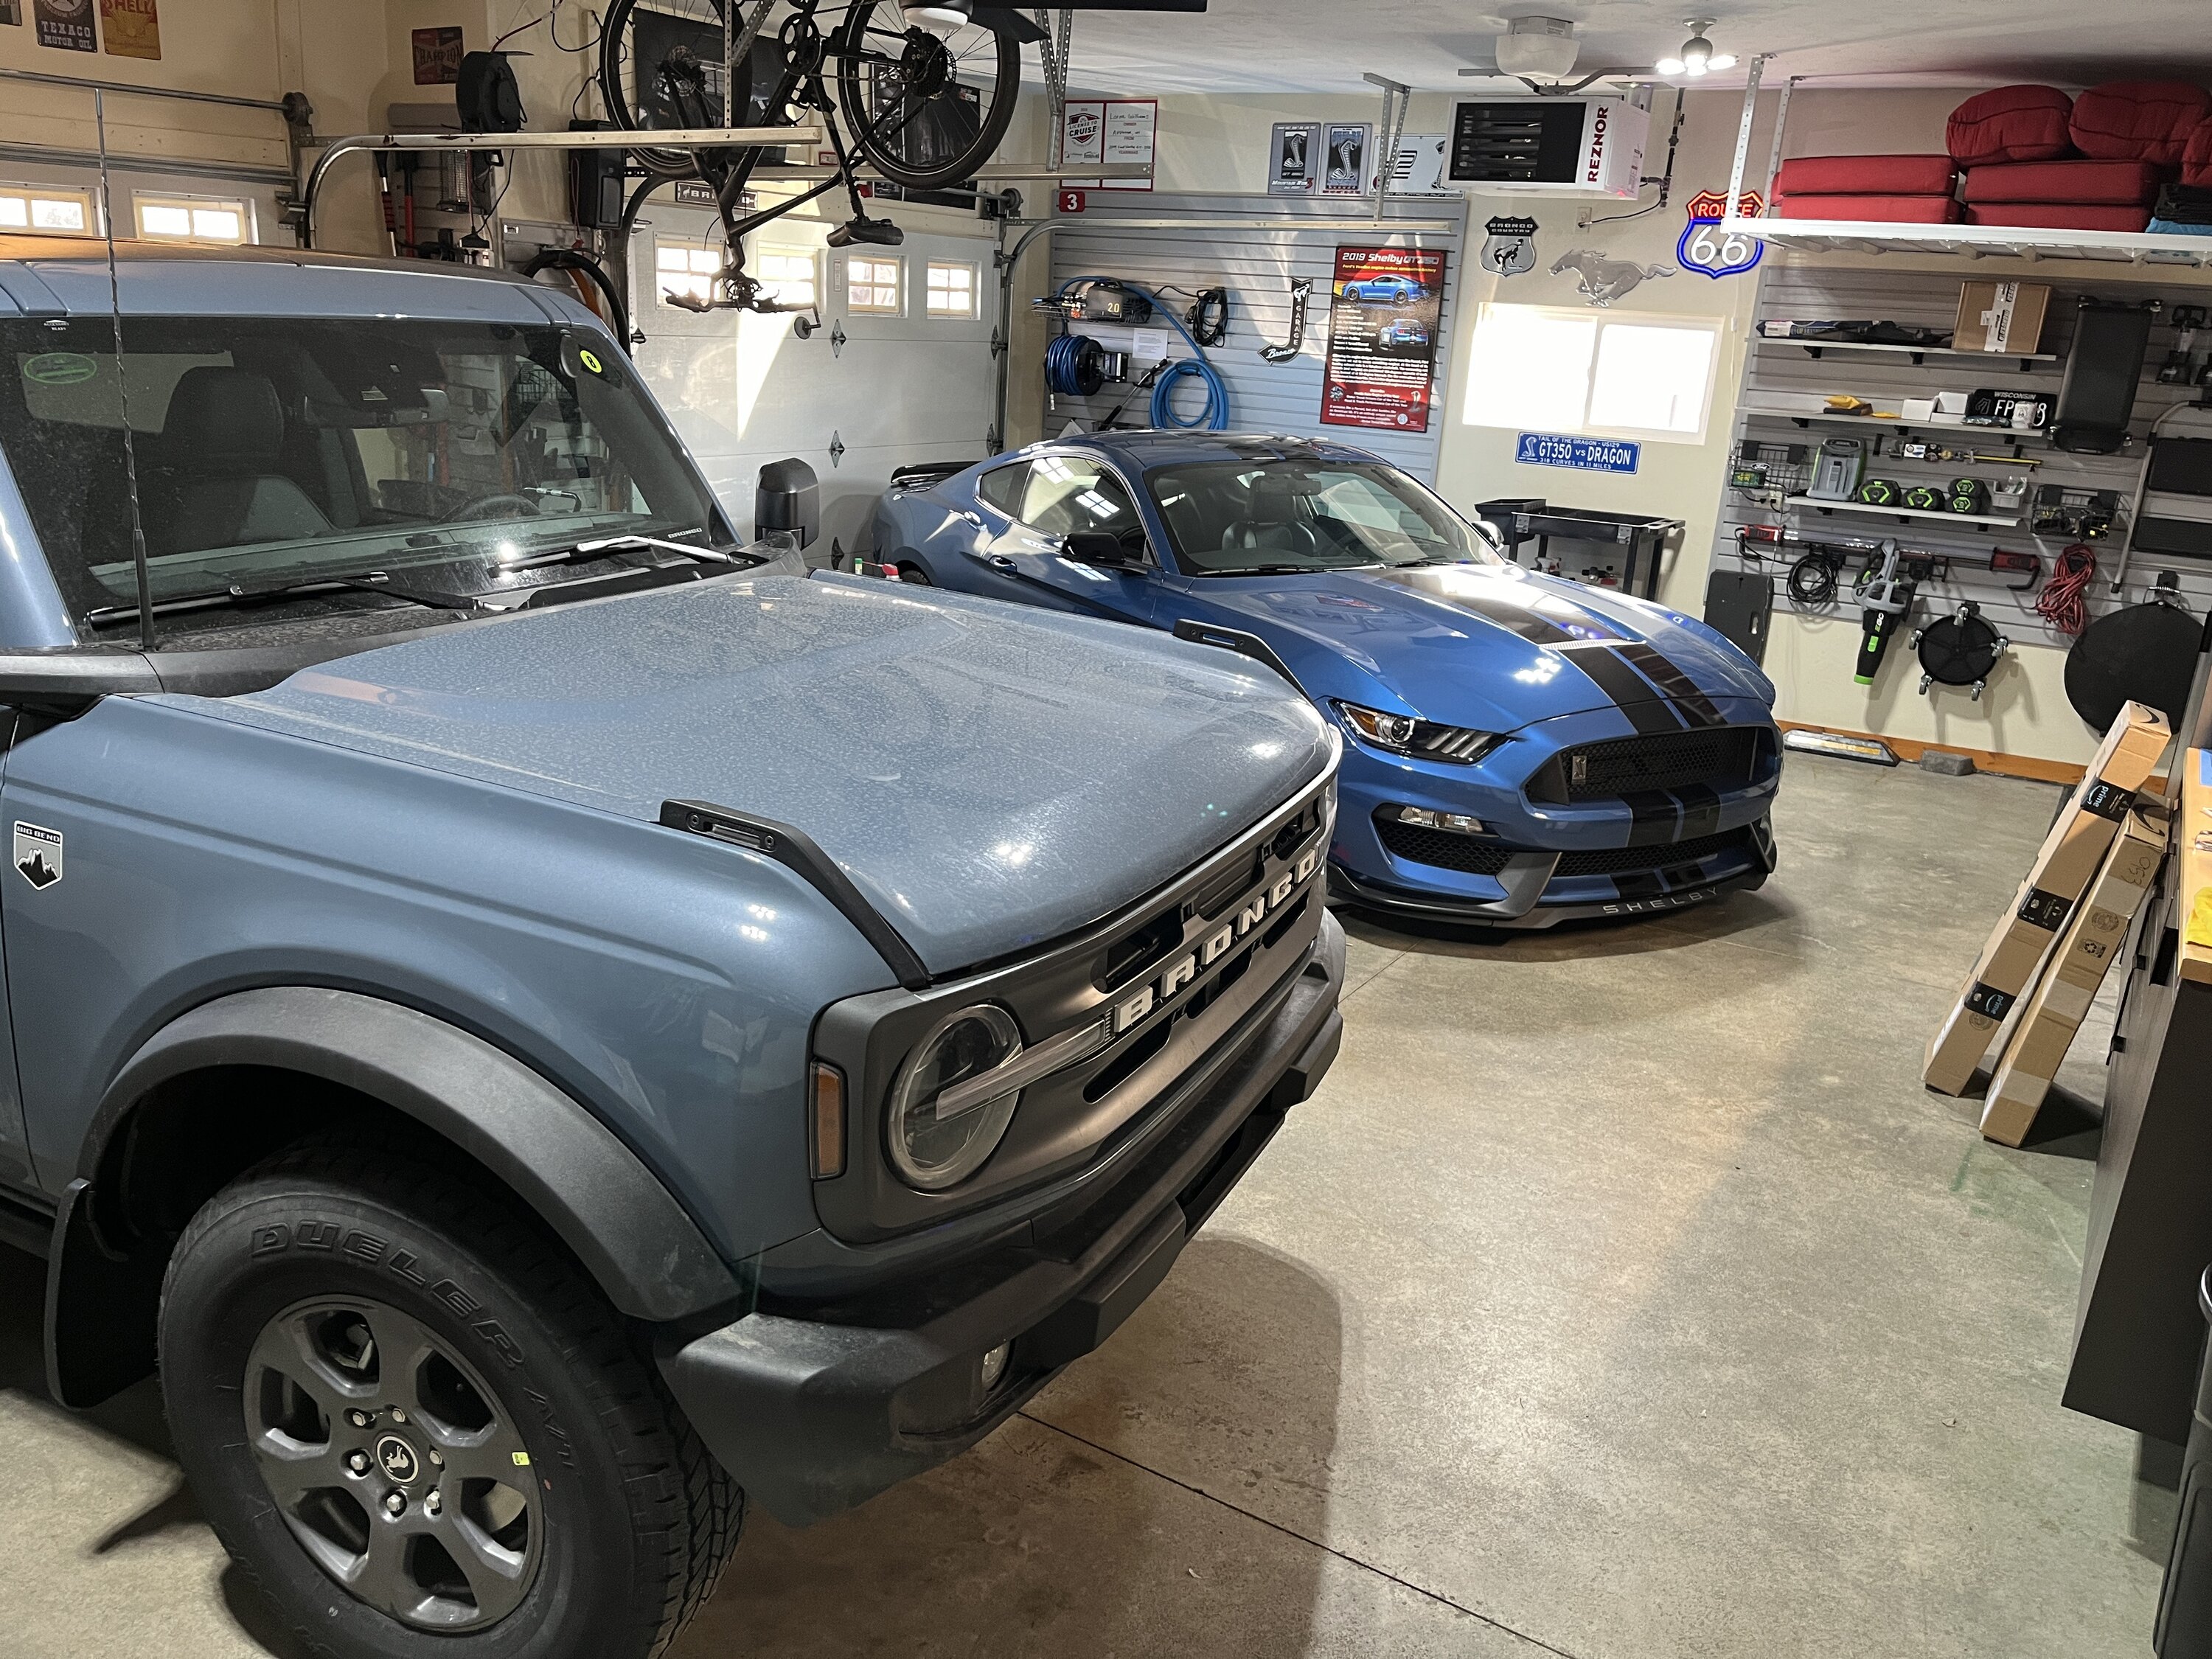 Ford Bronco Considering buying new 2024 Bronco, thoughts on quality issues and problems? 20240210_210444092_iOS